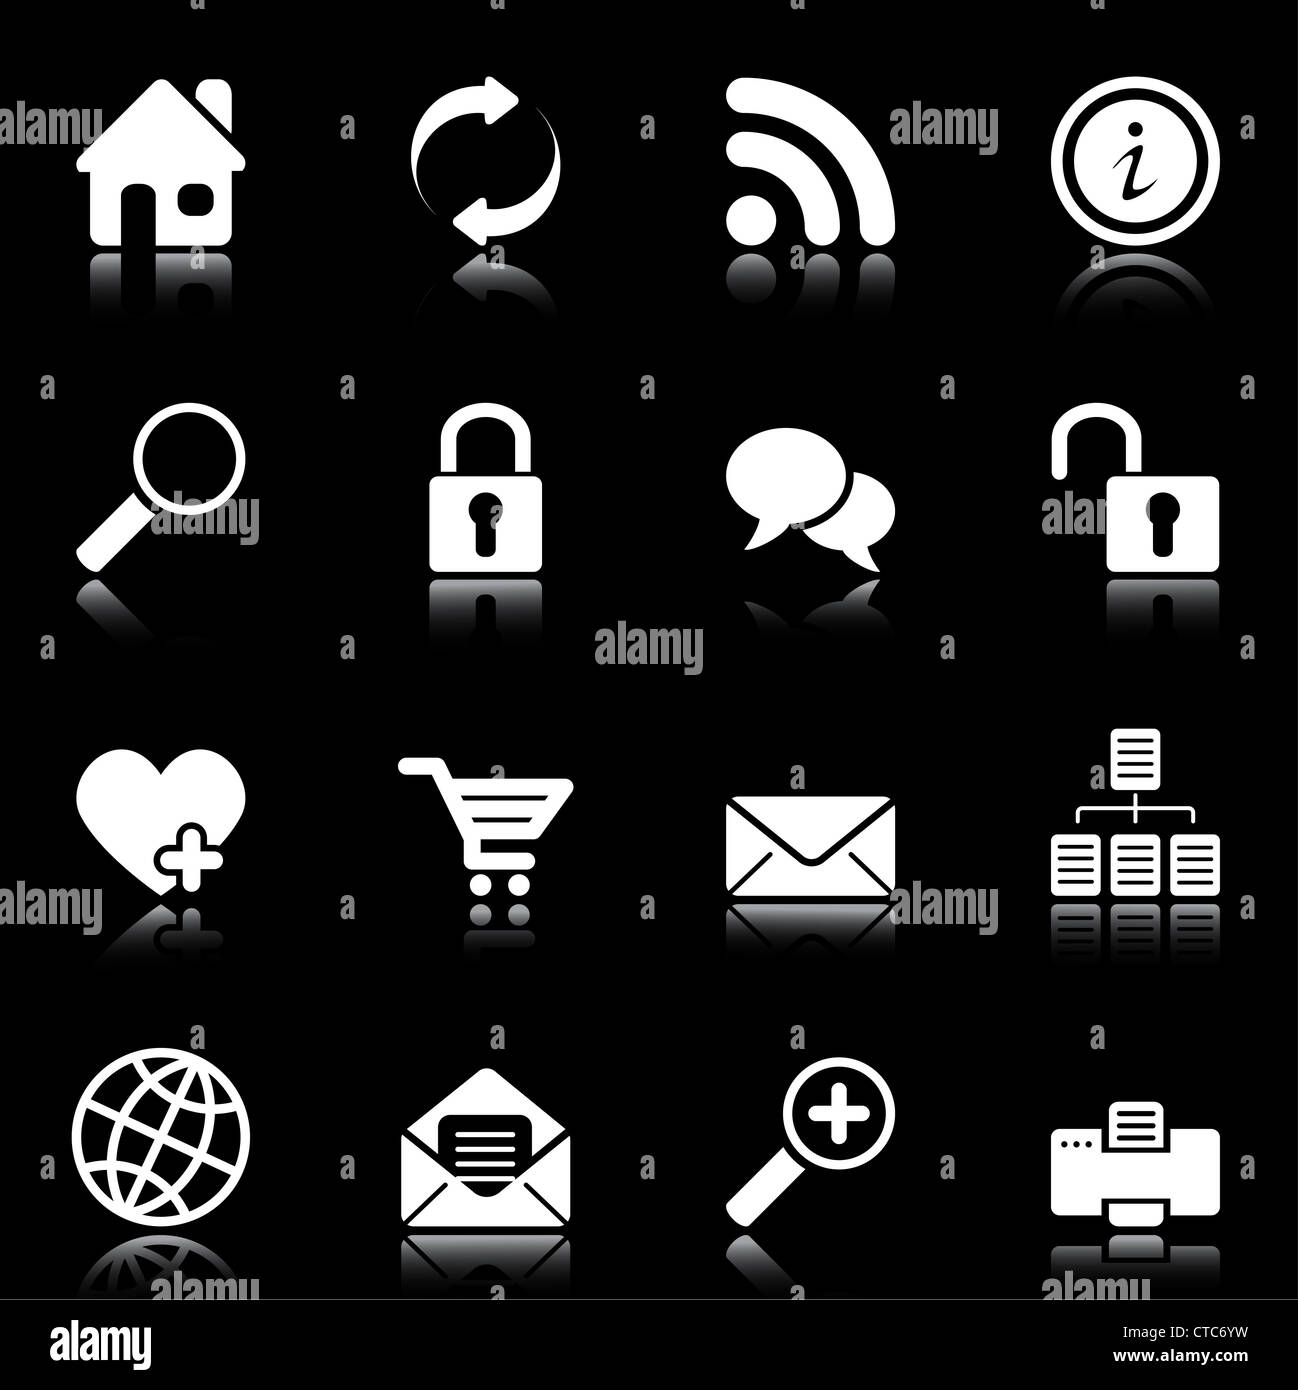 Web and Internet icons reflected on black background, isolated objects Stock Photo